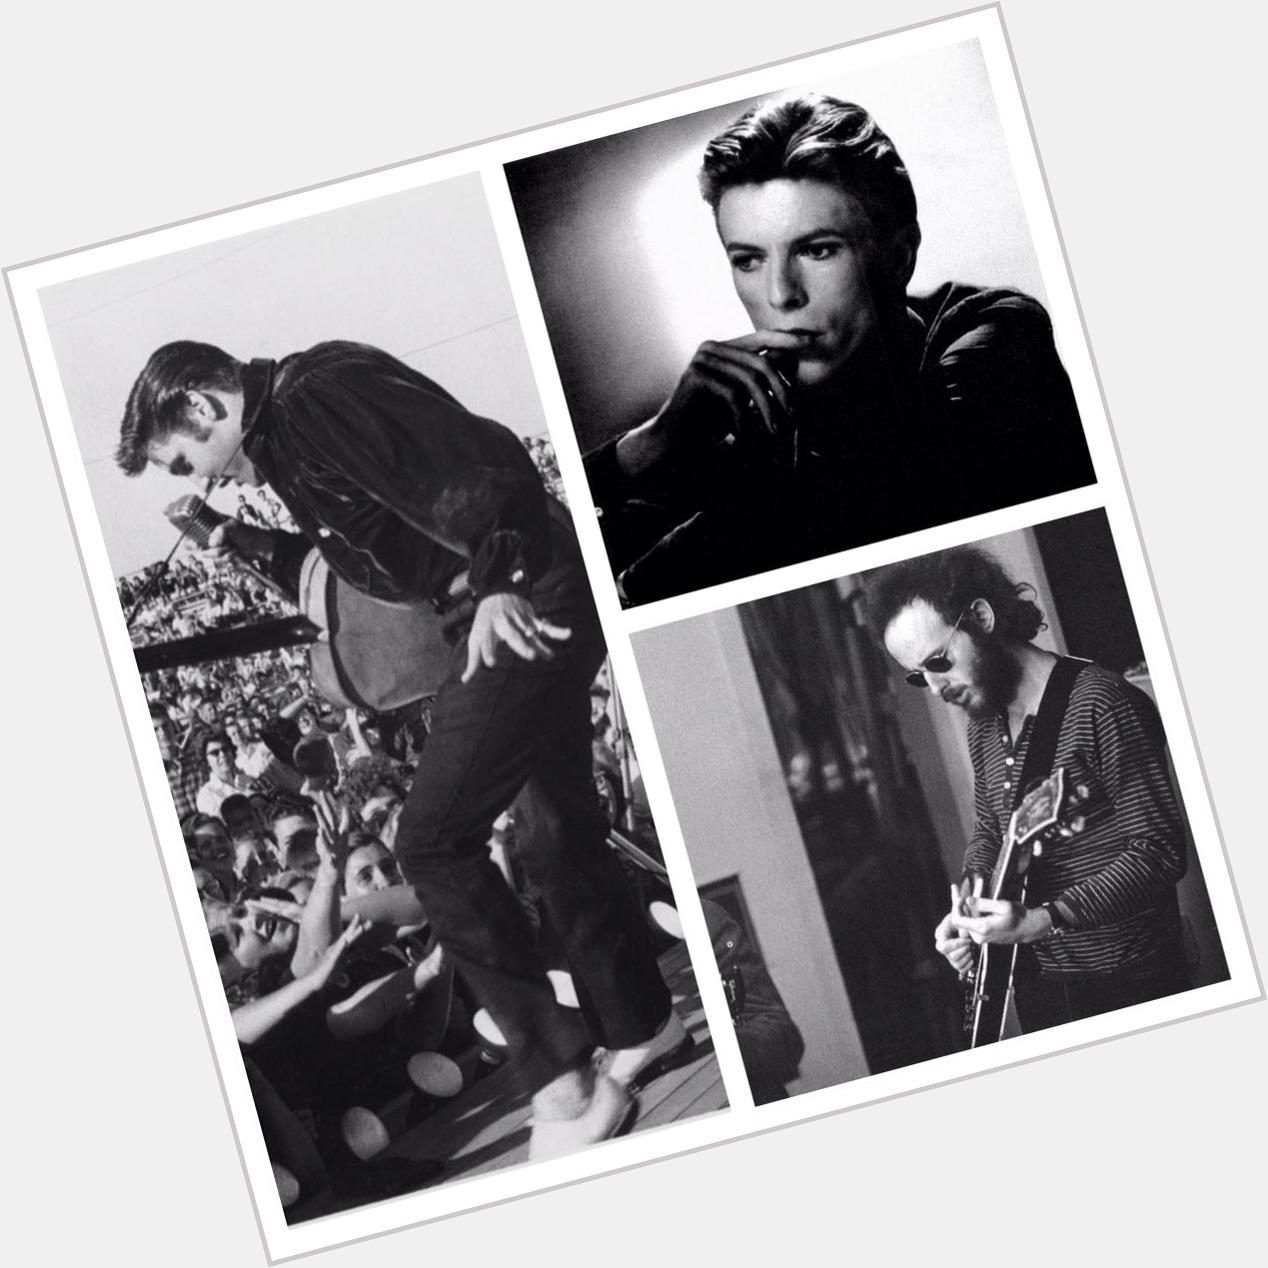 We acknowledge the birthday of 3 music legends today! Happy birthday to Elvis Presley, Robby Krieger and David Bowie! 